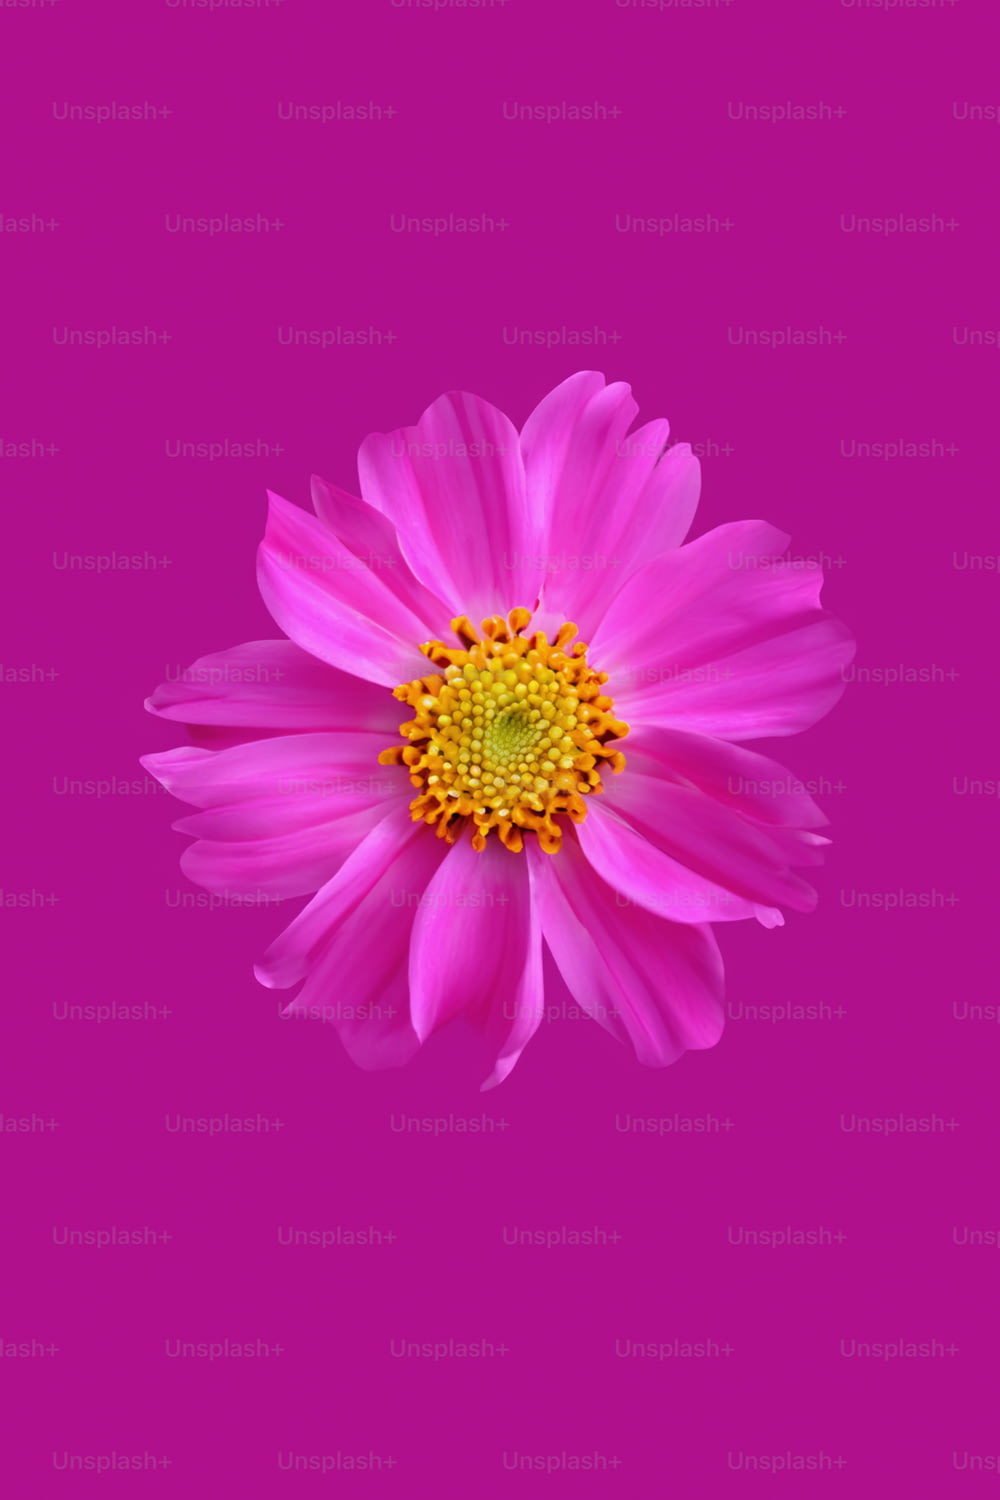 a pink flower with a yellow center on a pink background